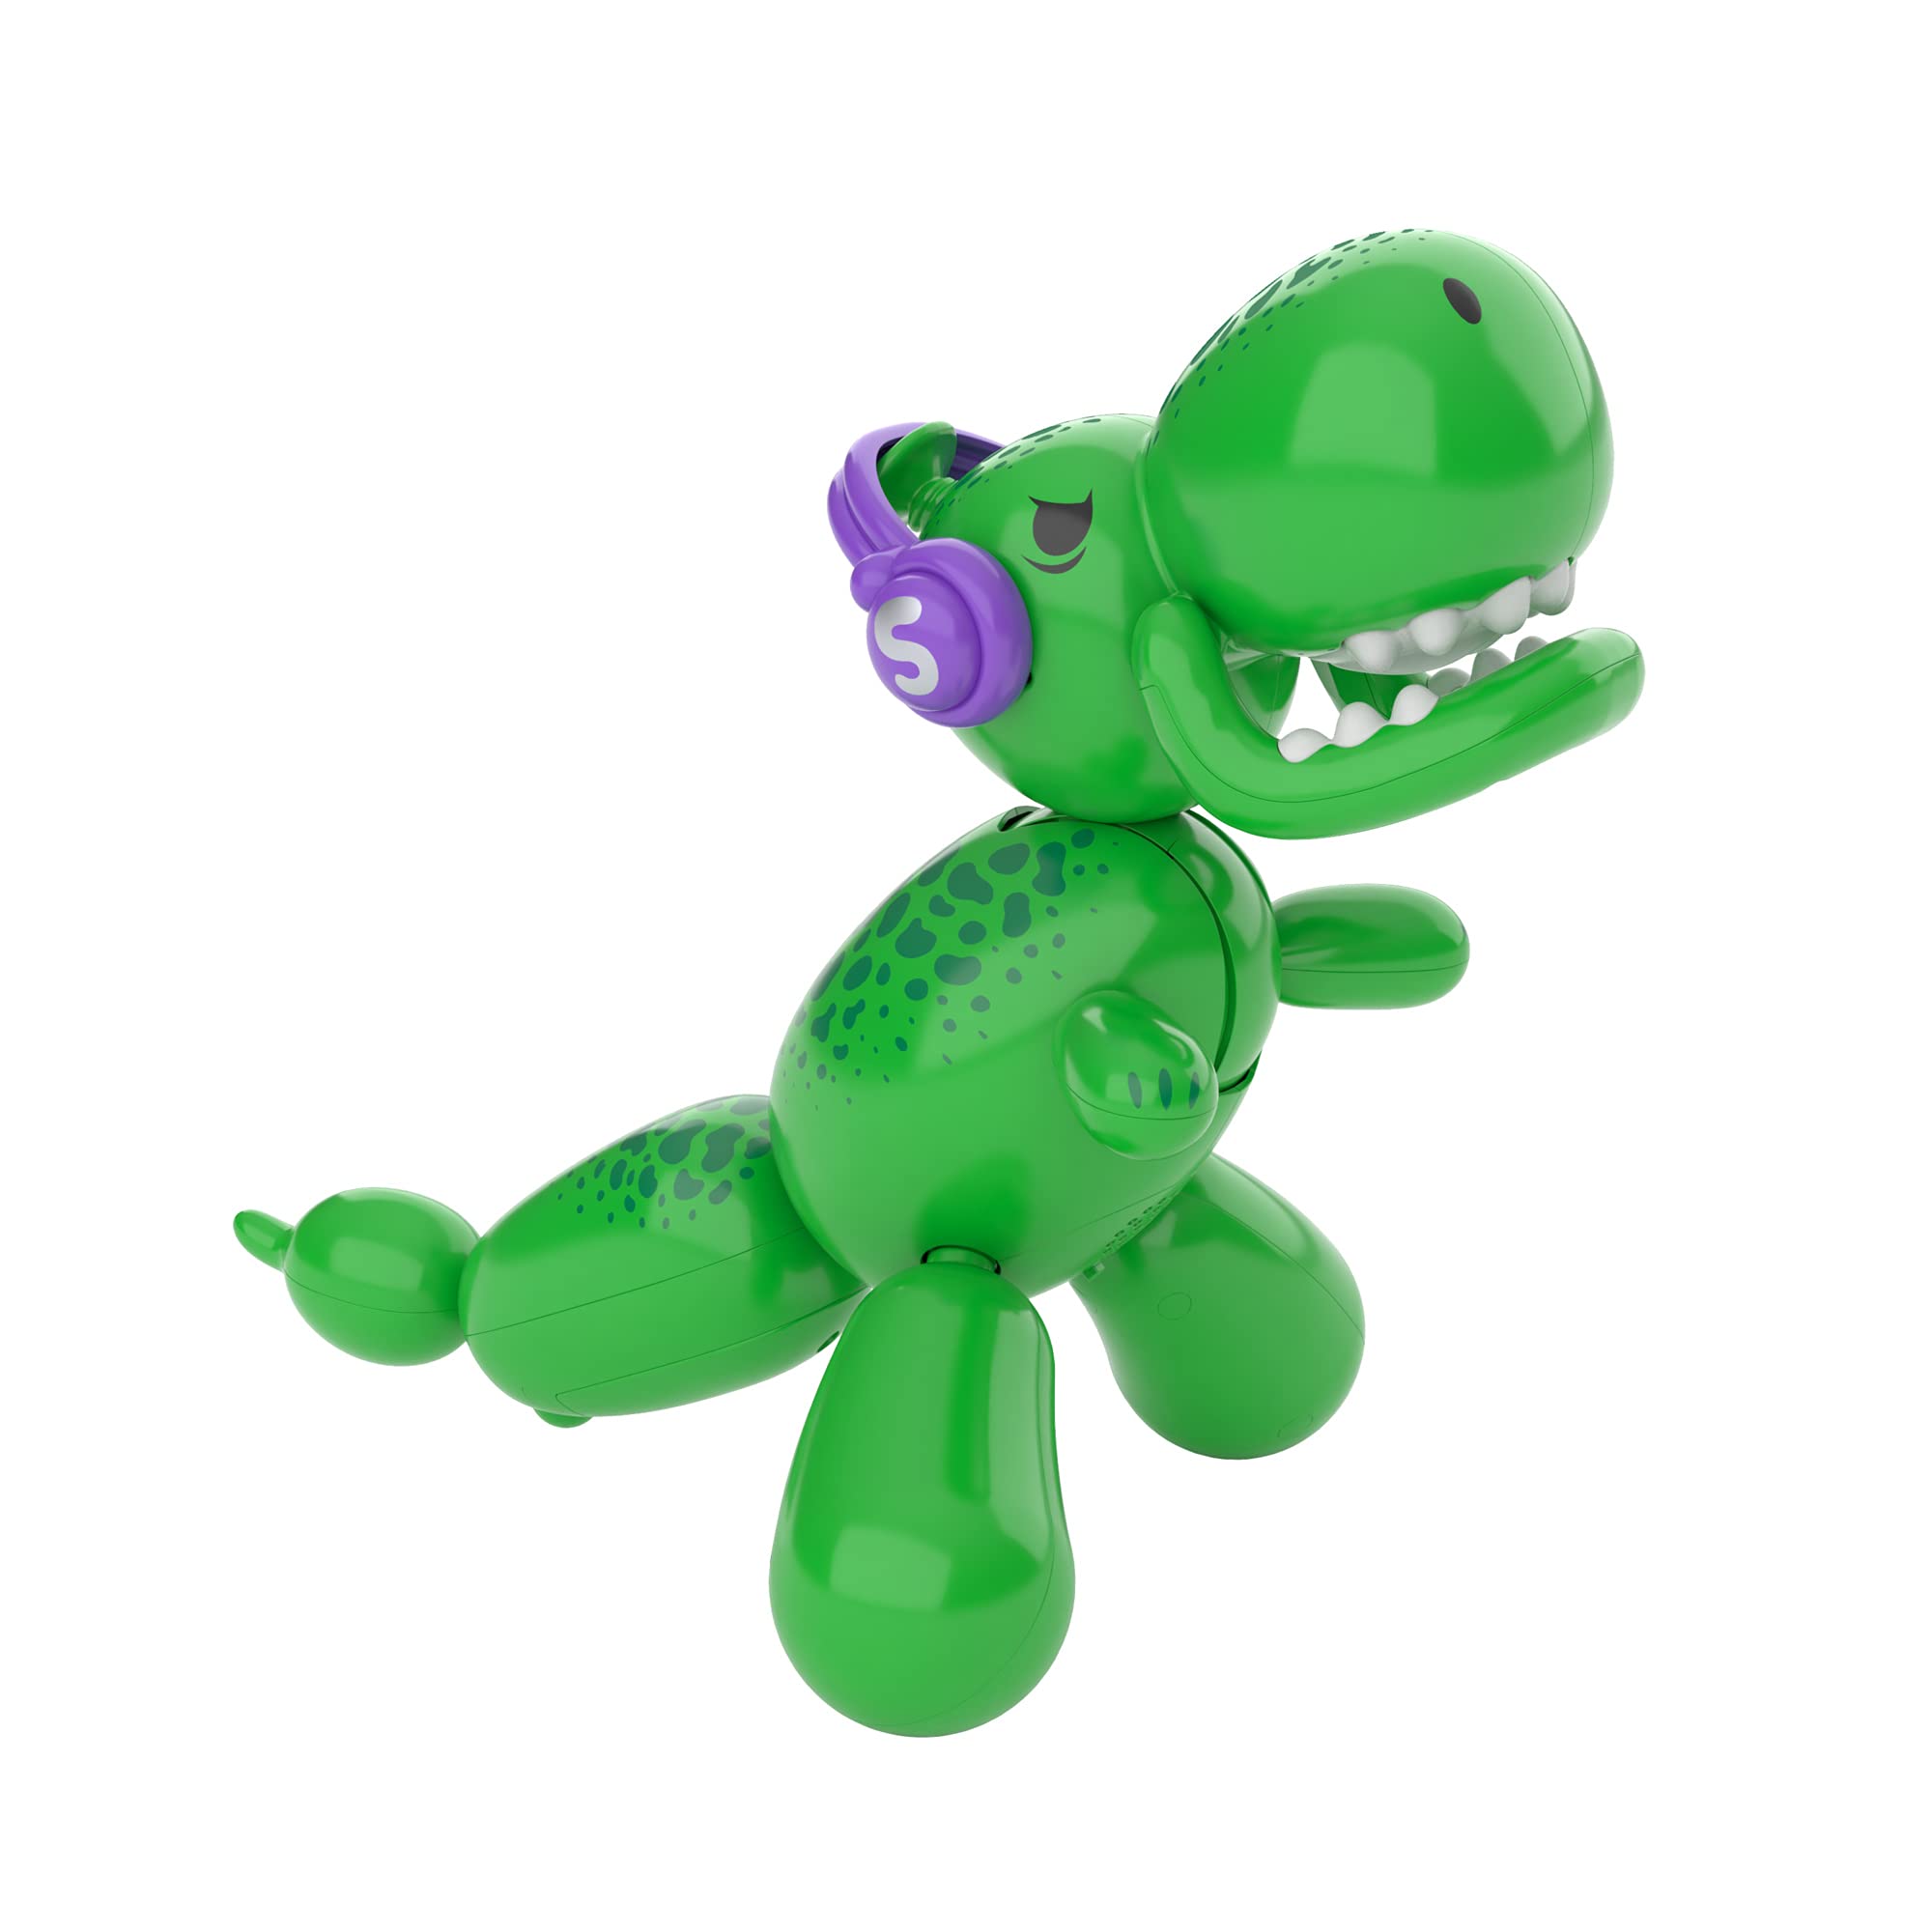 Limited-time deal for Prime Members: Squeakee The Balloon Dino | Interactive Dinosaur Pet Toy That Stomps, Roars and Dances. Over 70+ Sounds & Reactions, Multicolor - $19.99